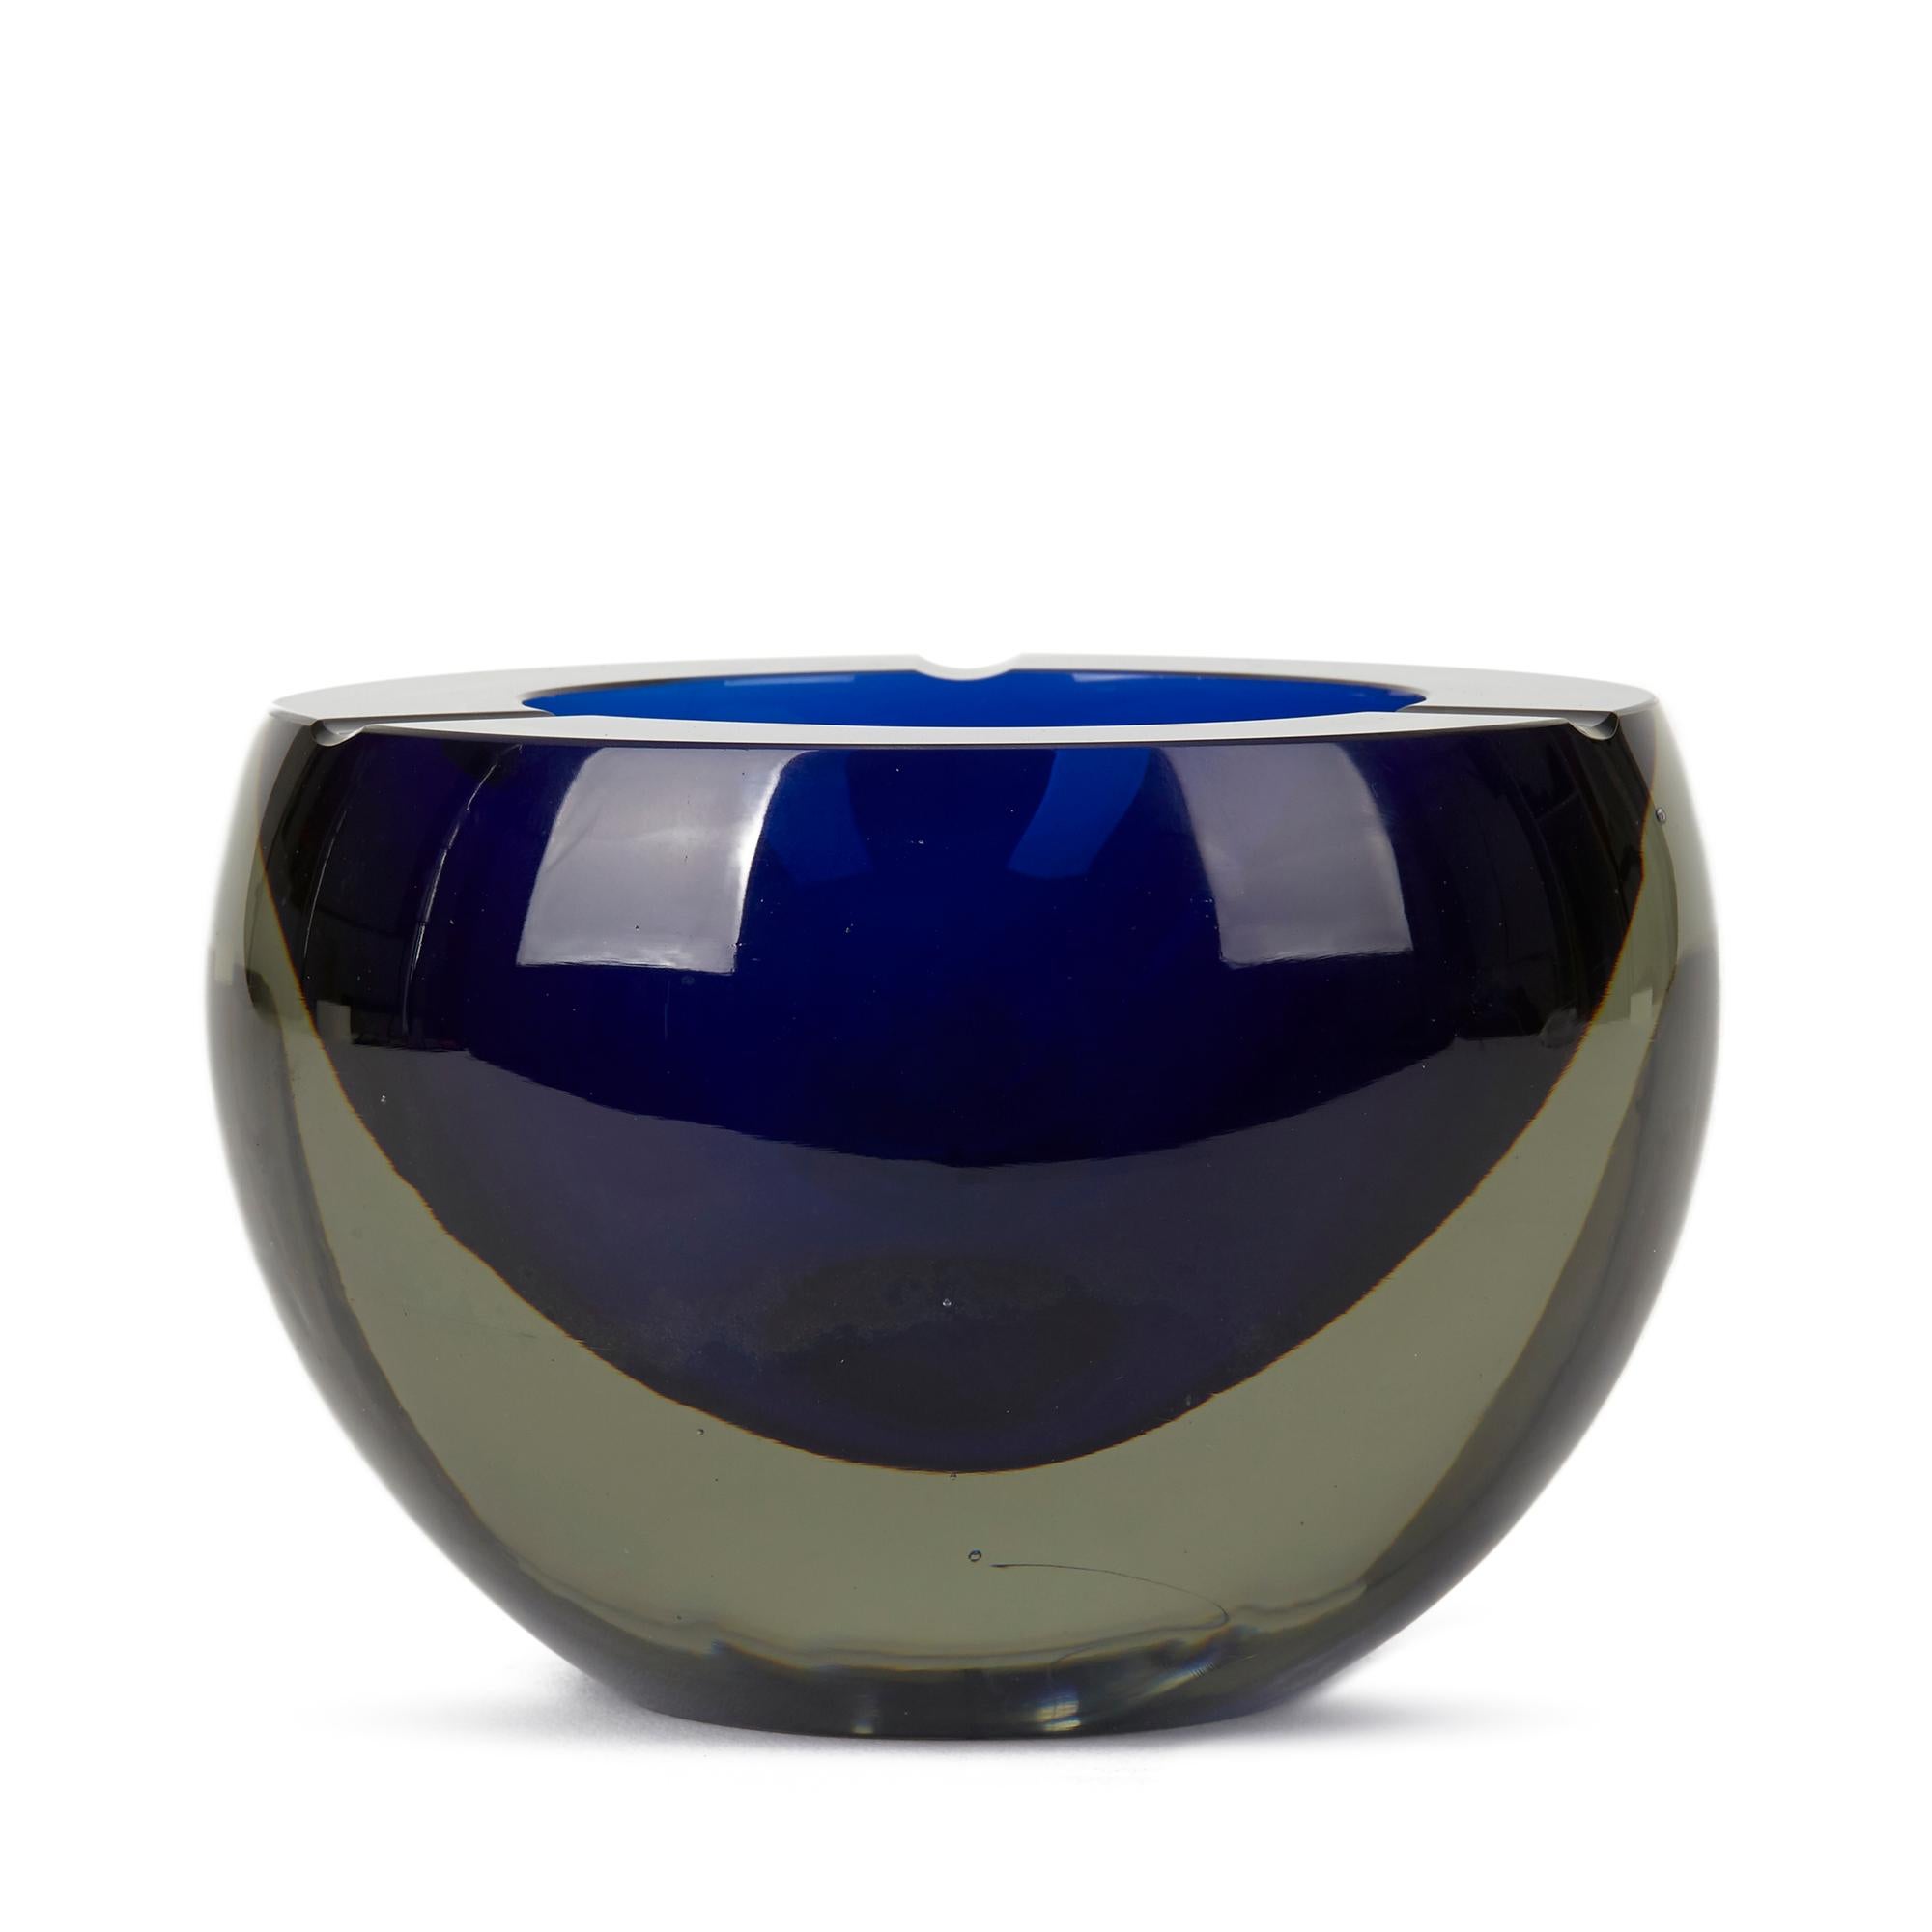 A stylish vintage Italian, Murano Sommerso art glass ashtray of orb shape designed by Antonio da Ros (b.1936) for Gino Cenedese. The heavily made ashtray has a blue centre cased in smoked glass the rounded flat polished opening with a three small